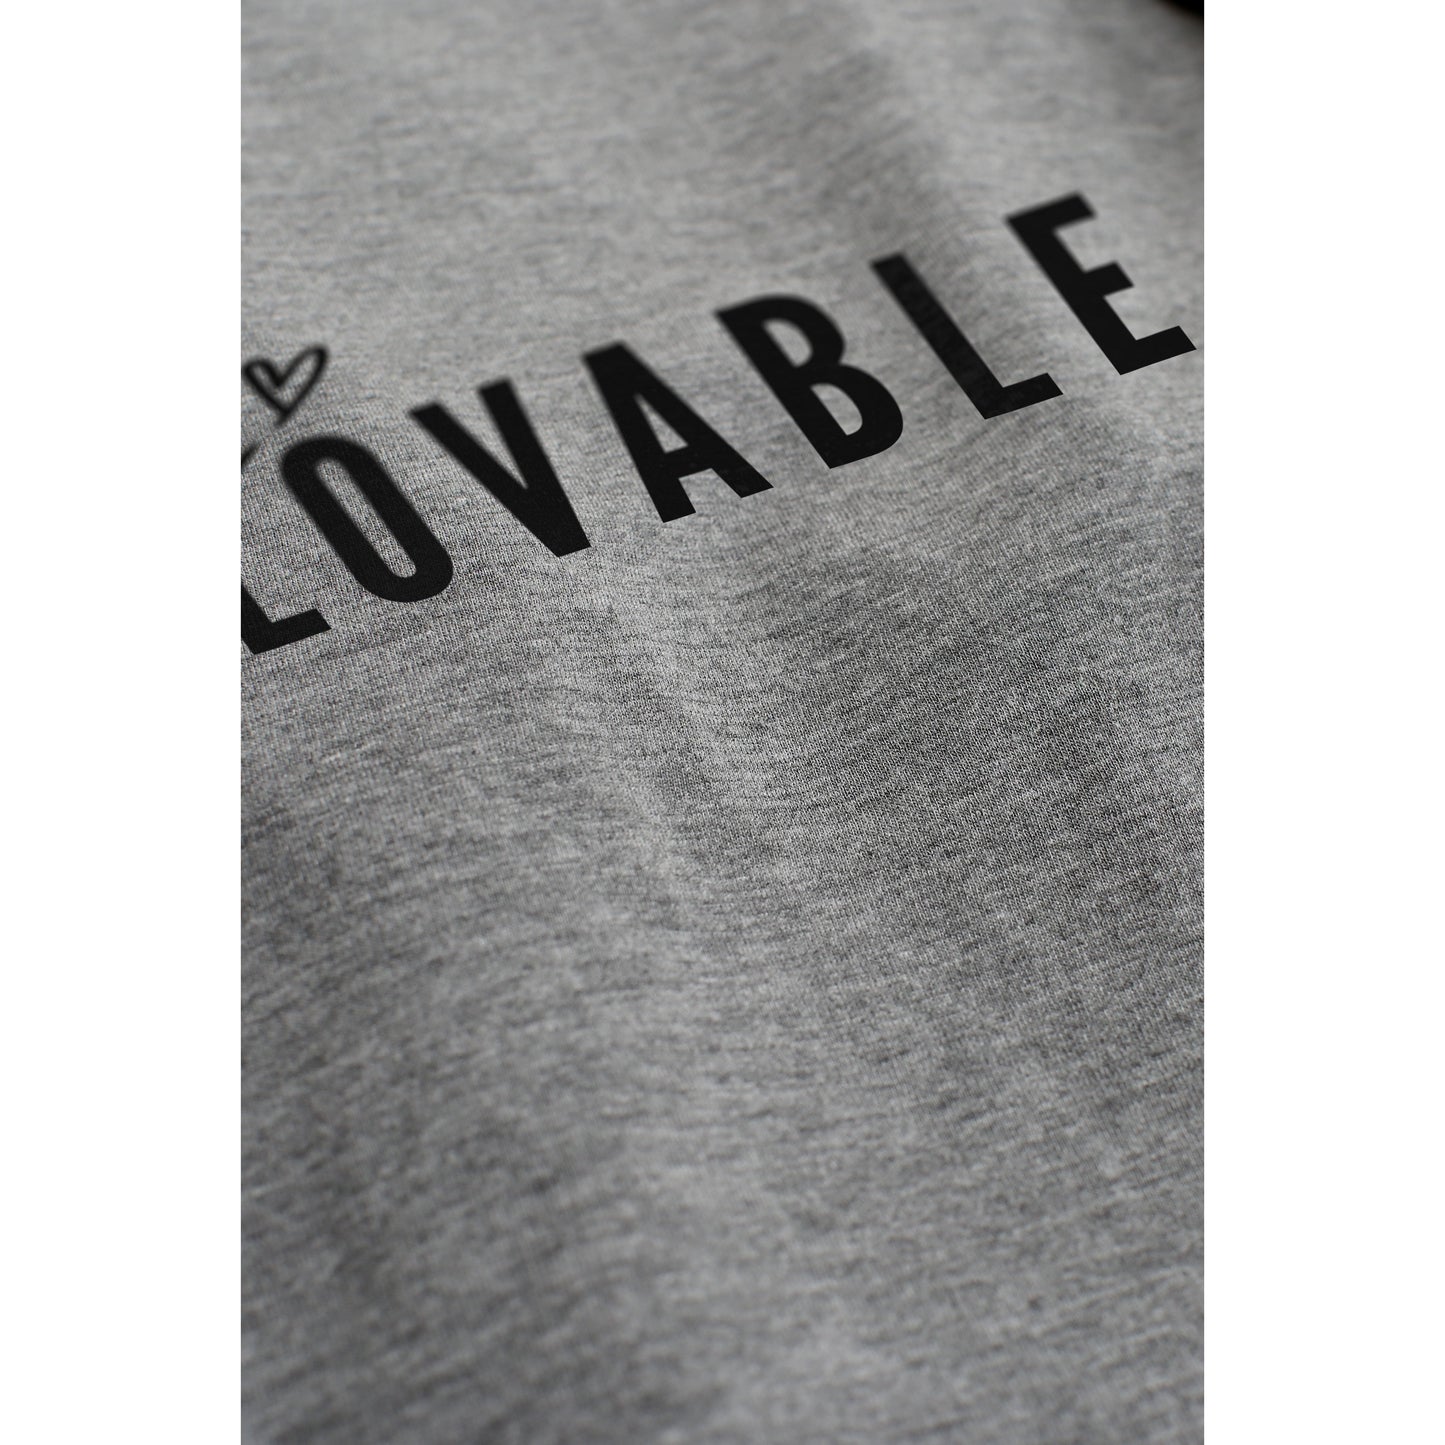 Lovable - Stories You Can Wear by Thread Tank